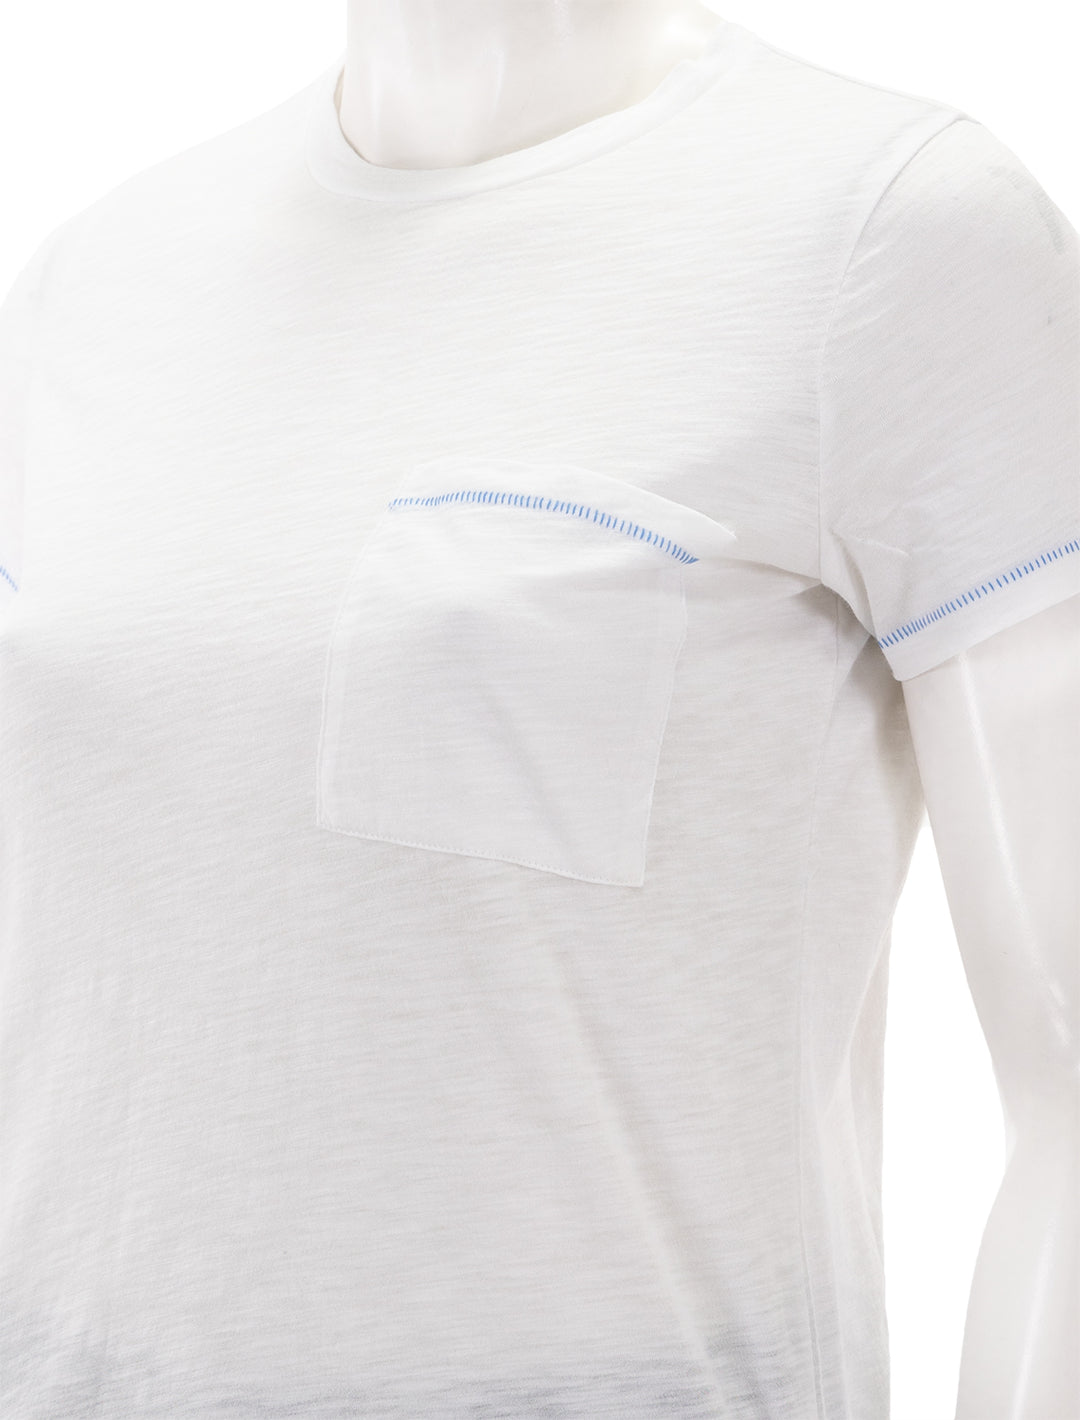 Close-up view of Goldie Lewinter's contrast stitch pocket boy tee.